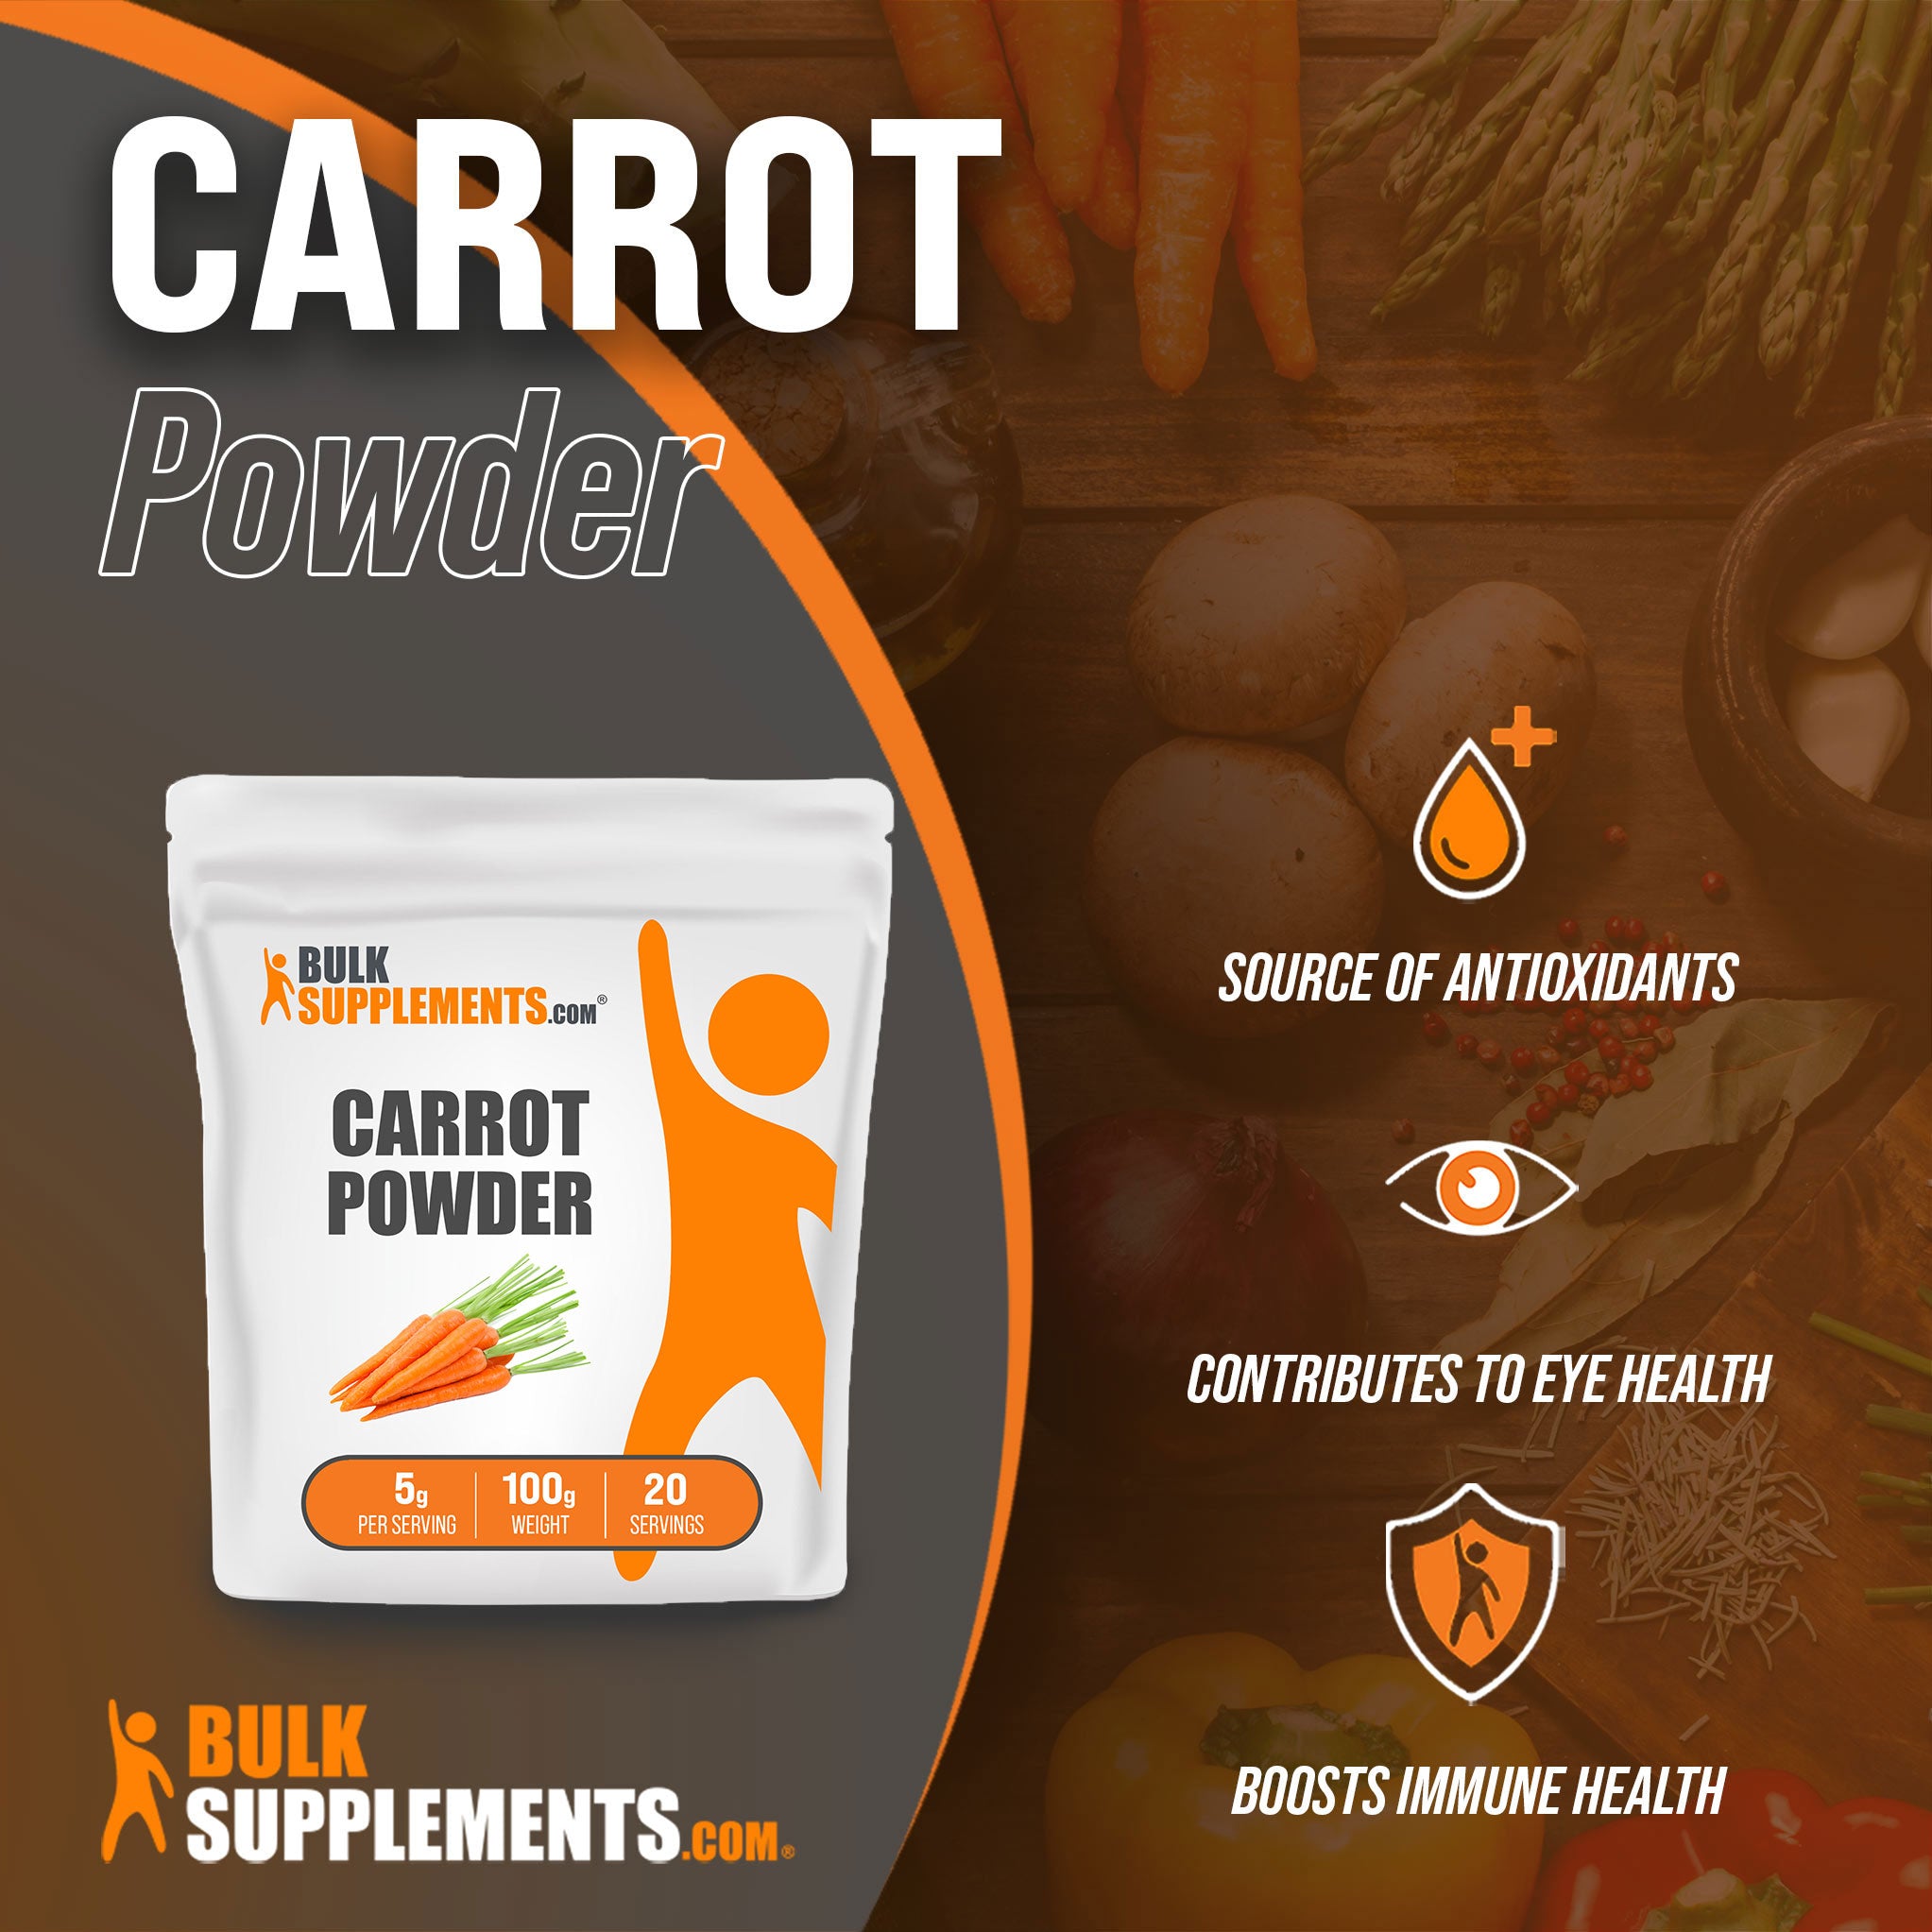 Benefits of Carrot Powder; source of antioxidants; contributes to eye health, boosts immune health